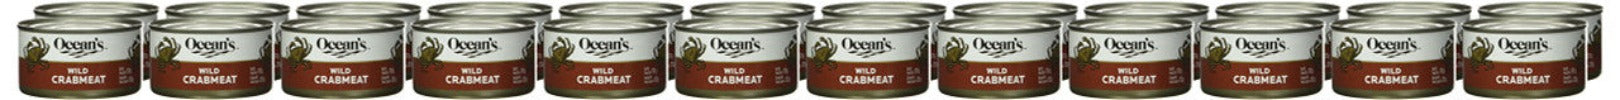 Ocean's Crabmeat with Leg meat in Water 24-Count {Imported from Canada}